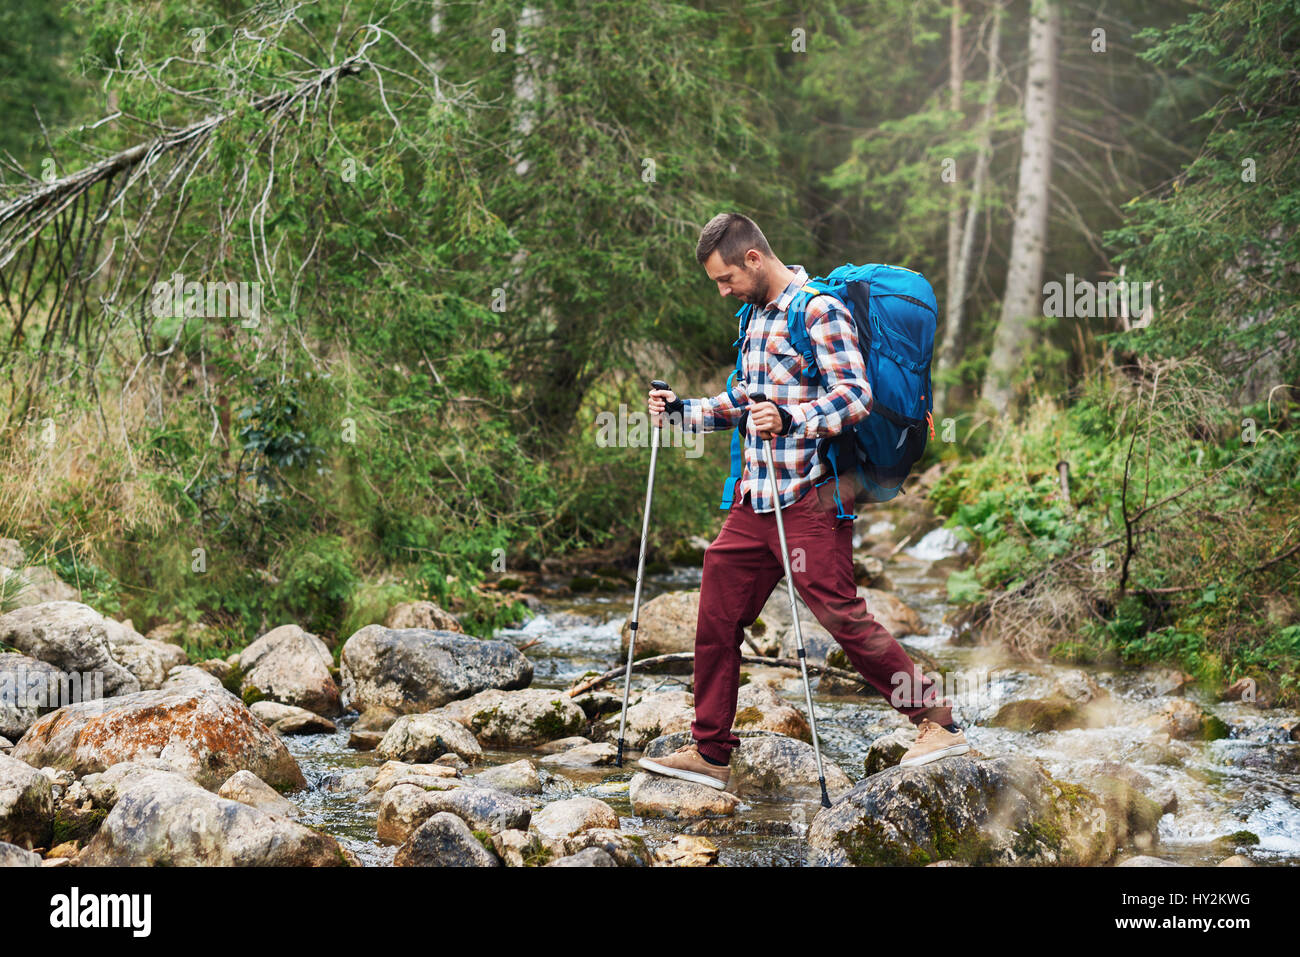 Hiker crossing a river in the forest Stock Photo